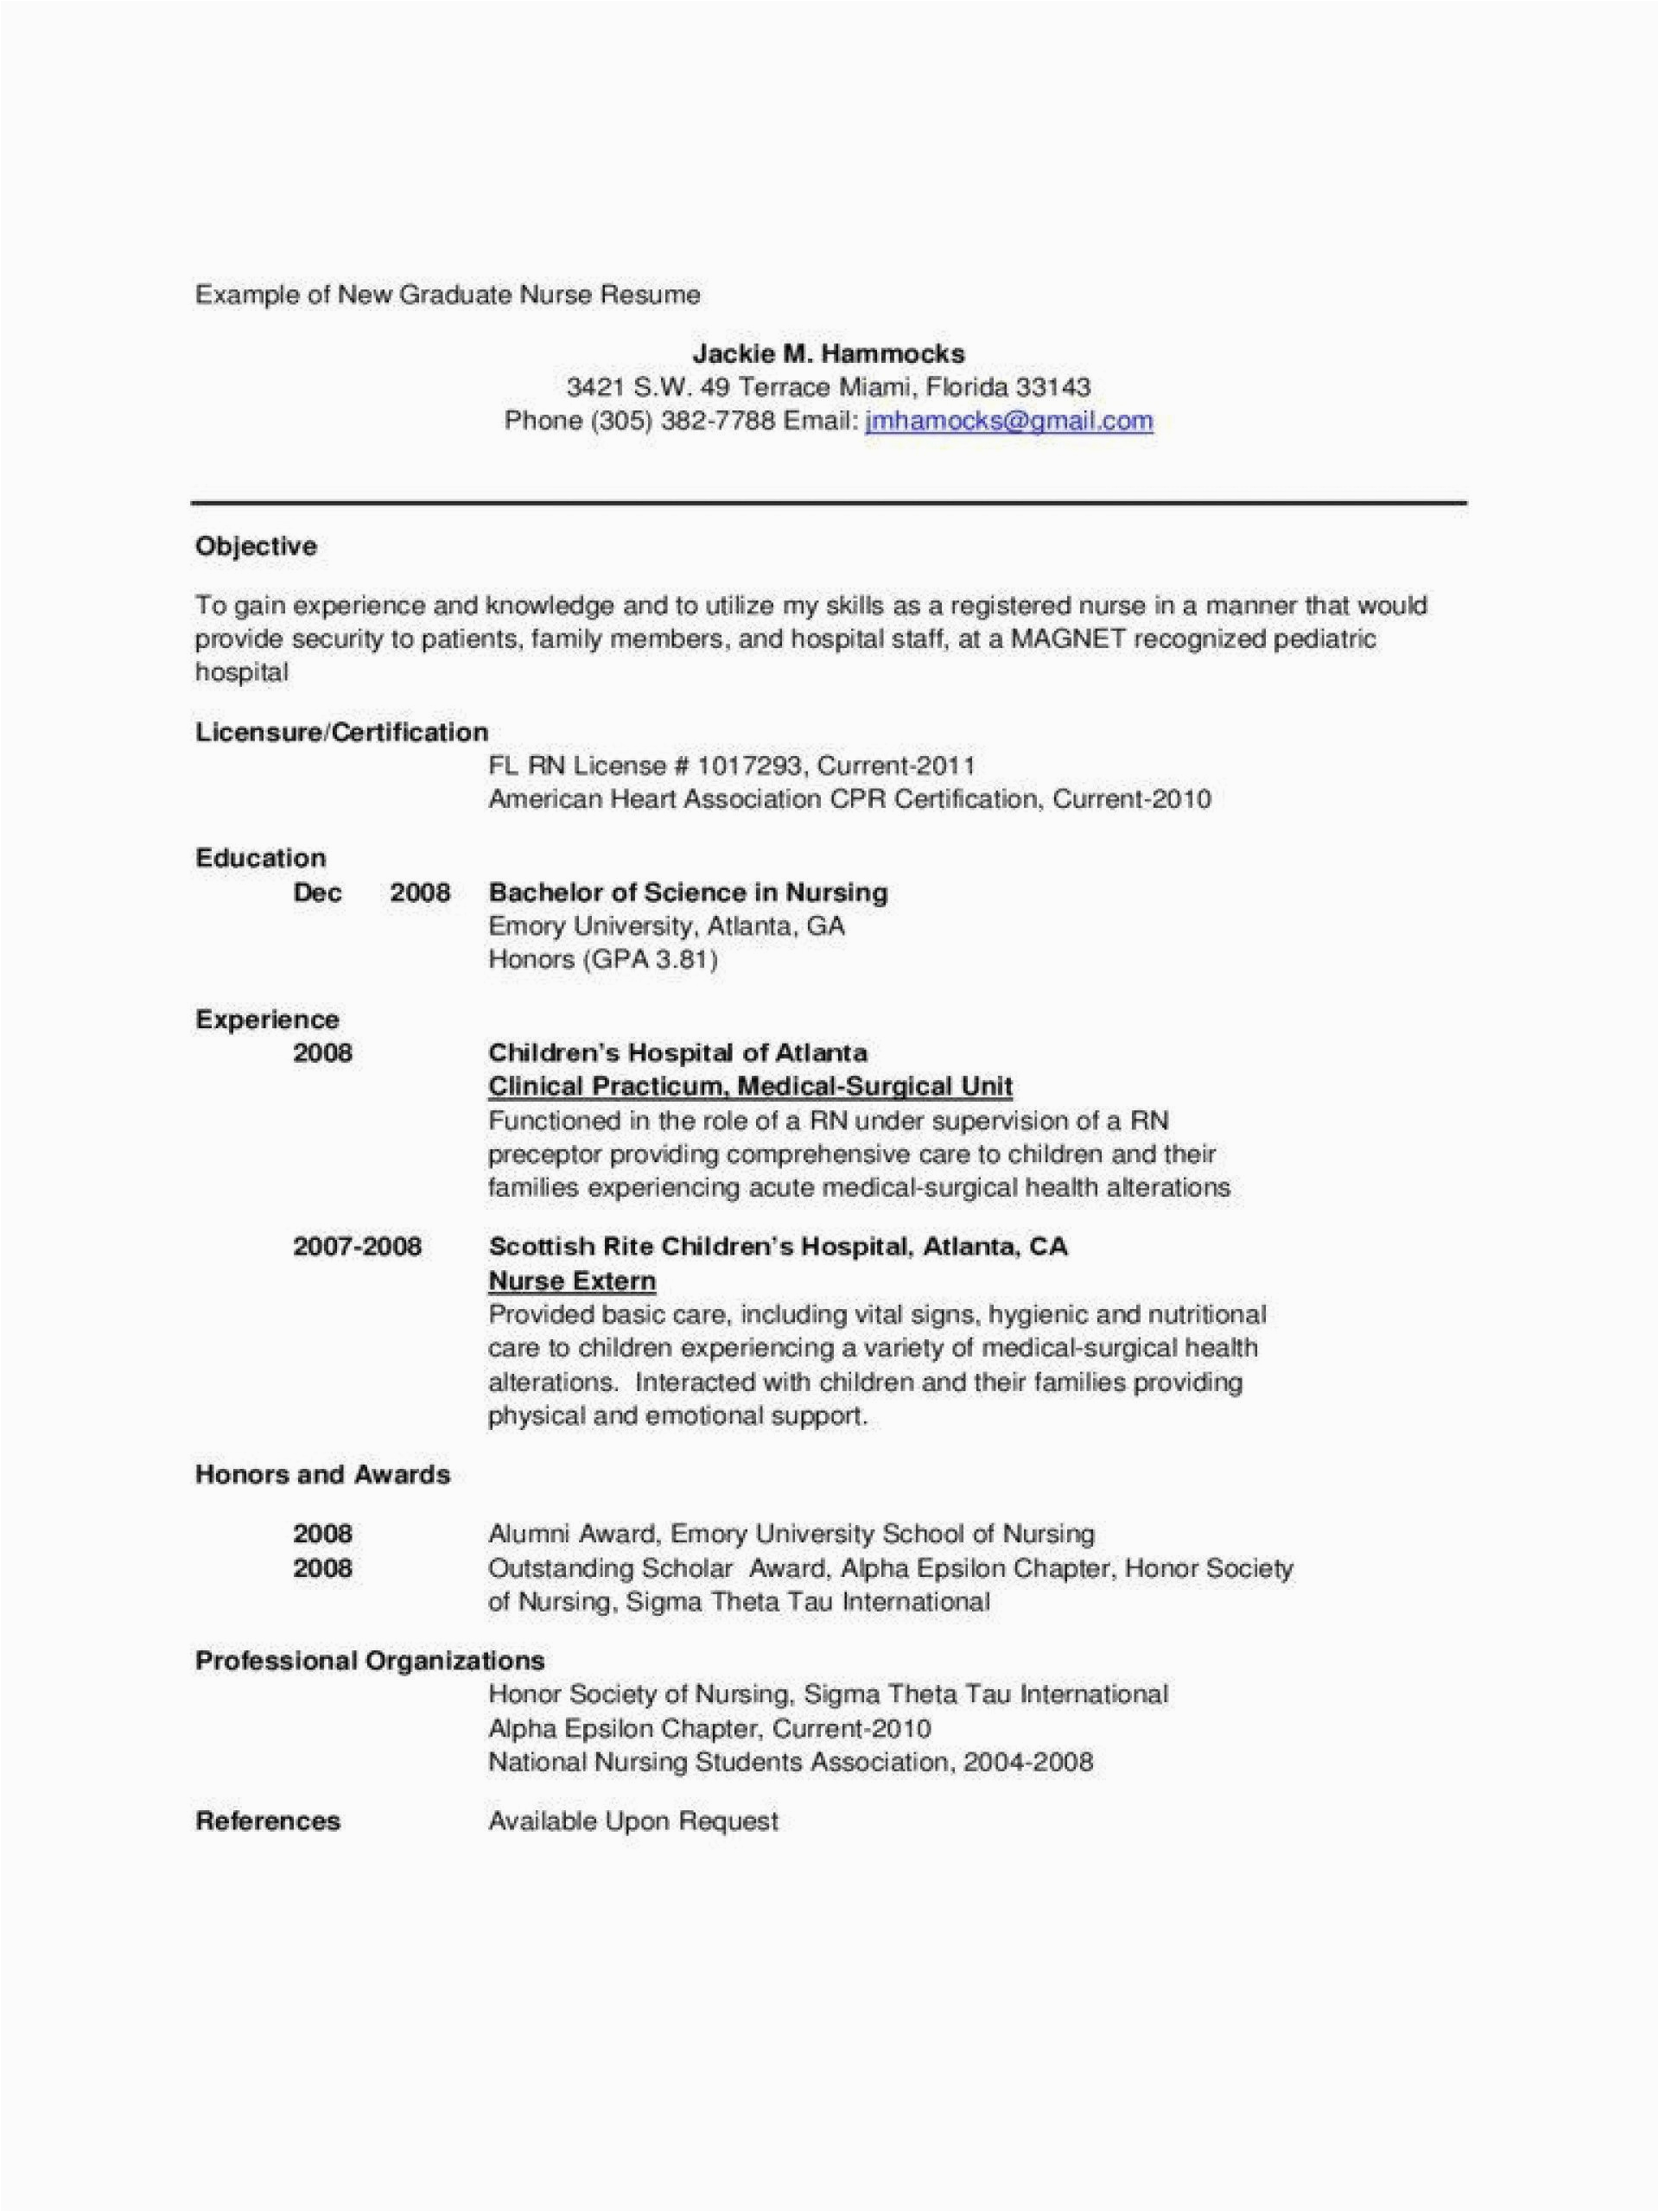 Sample Rn Resume with No Experience New Grad Rn Resume with No Experience Template Addictionary